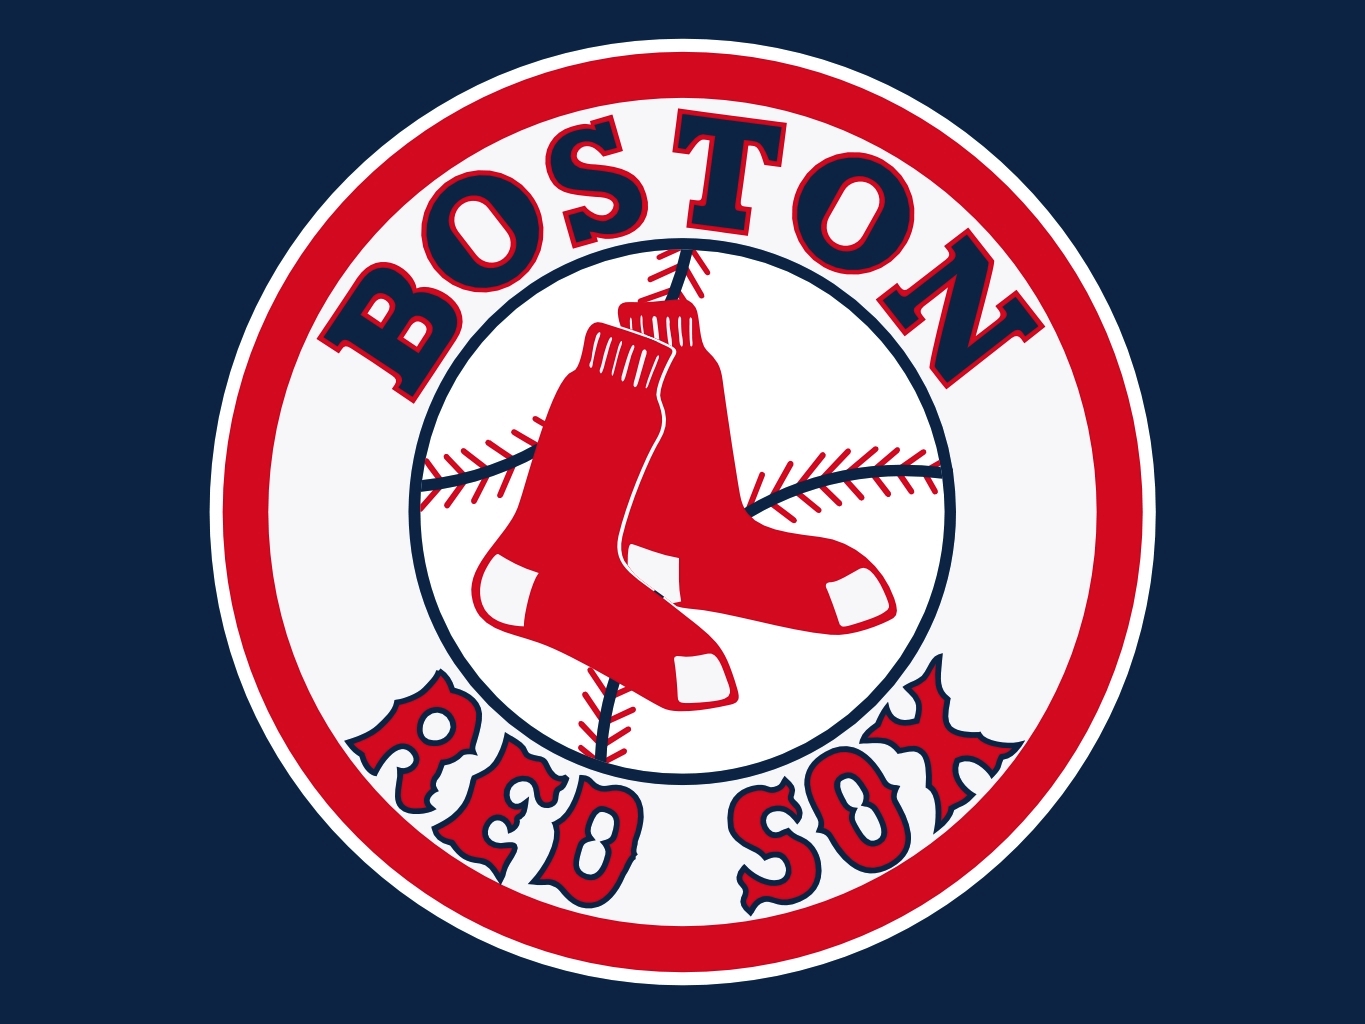 Buy Boston Red Sox Tickets Today